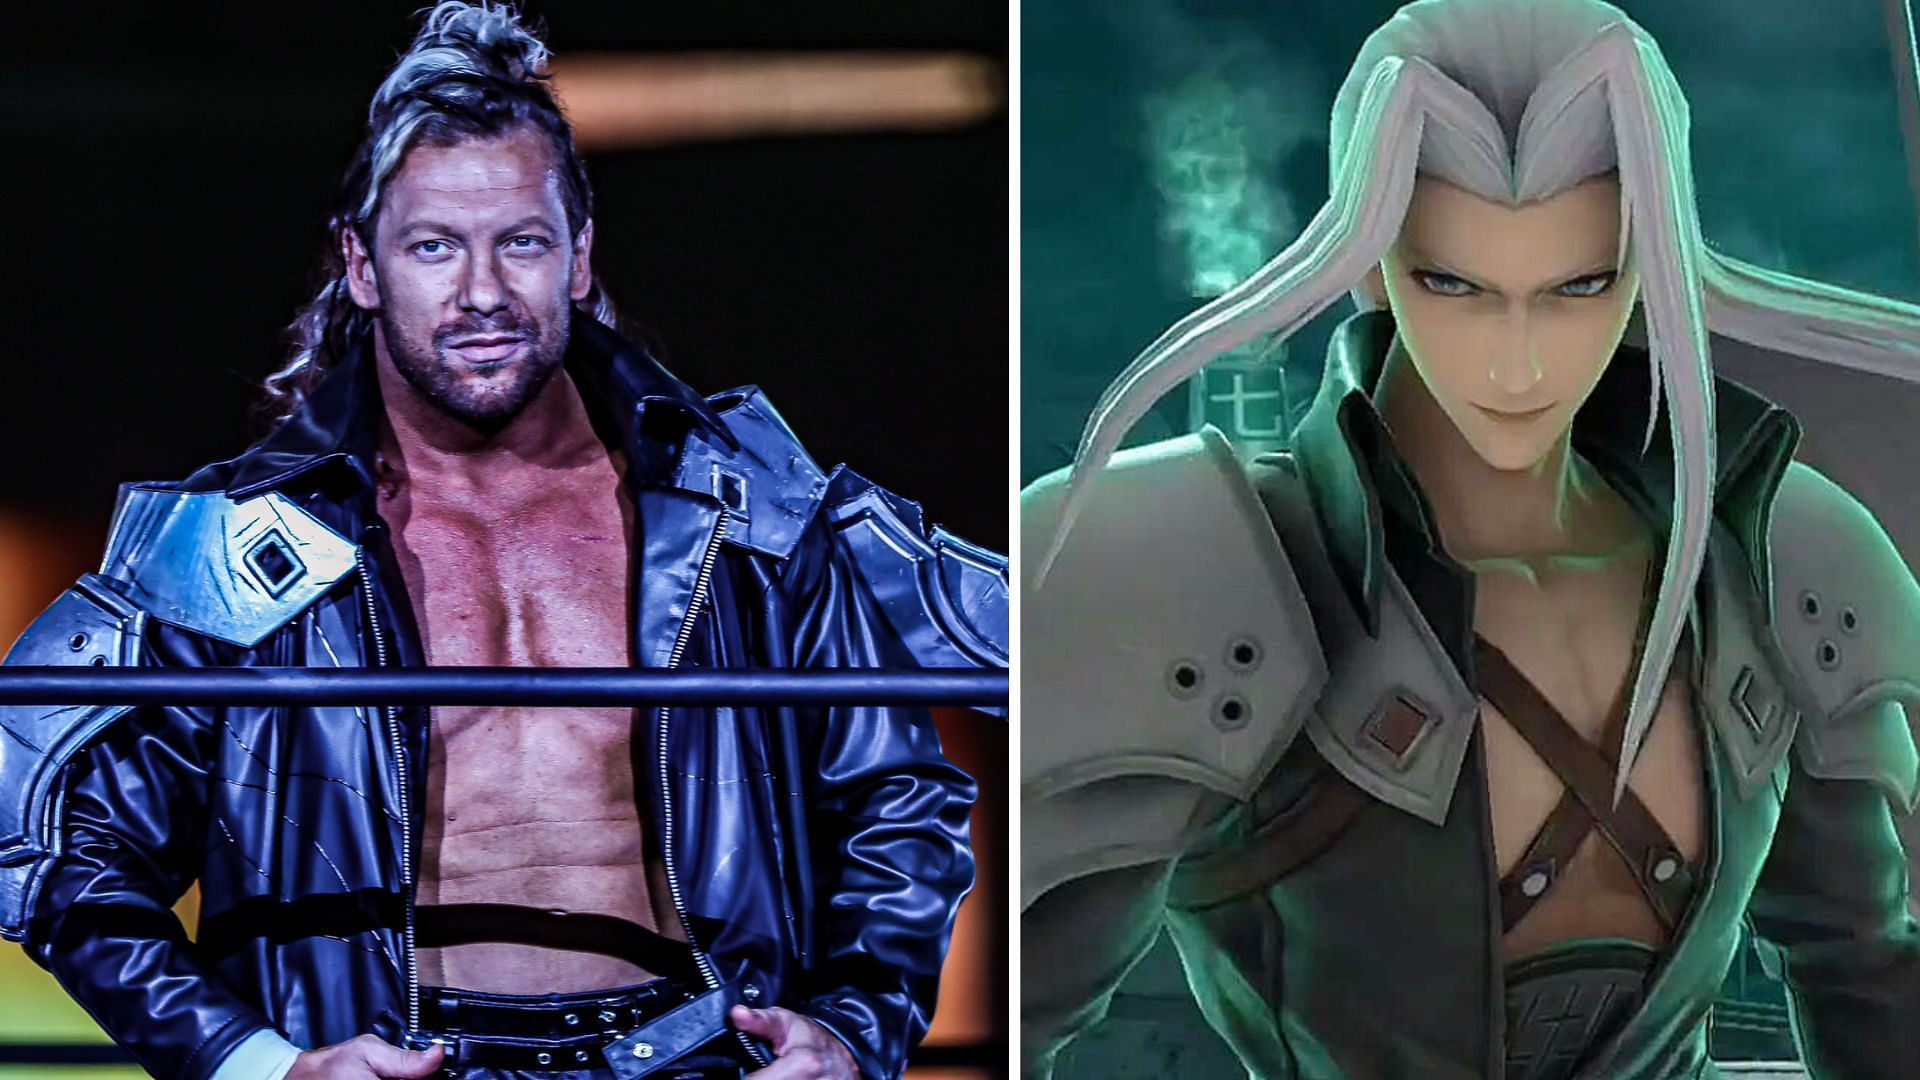 Kenny Omega cosplayed a Final Fantasy character at Wrestle Kingdom